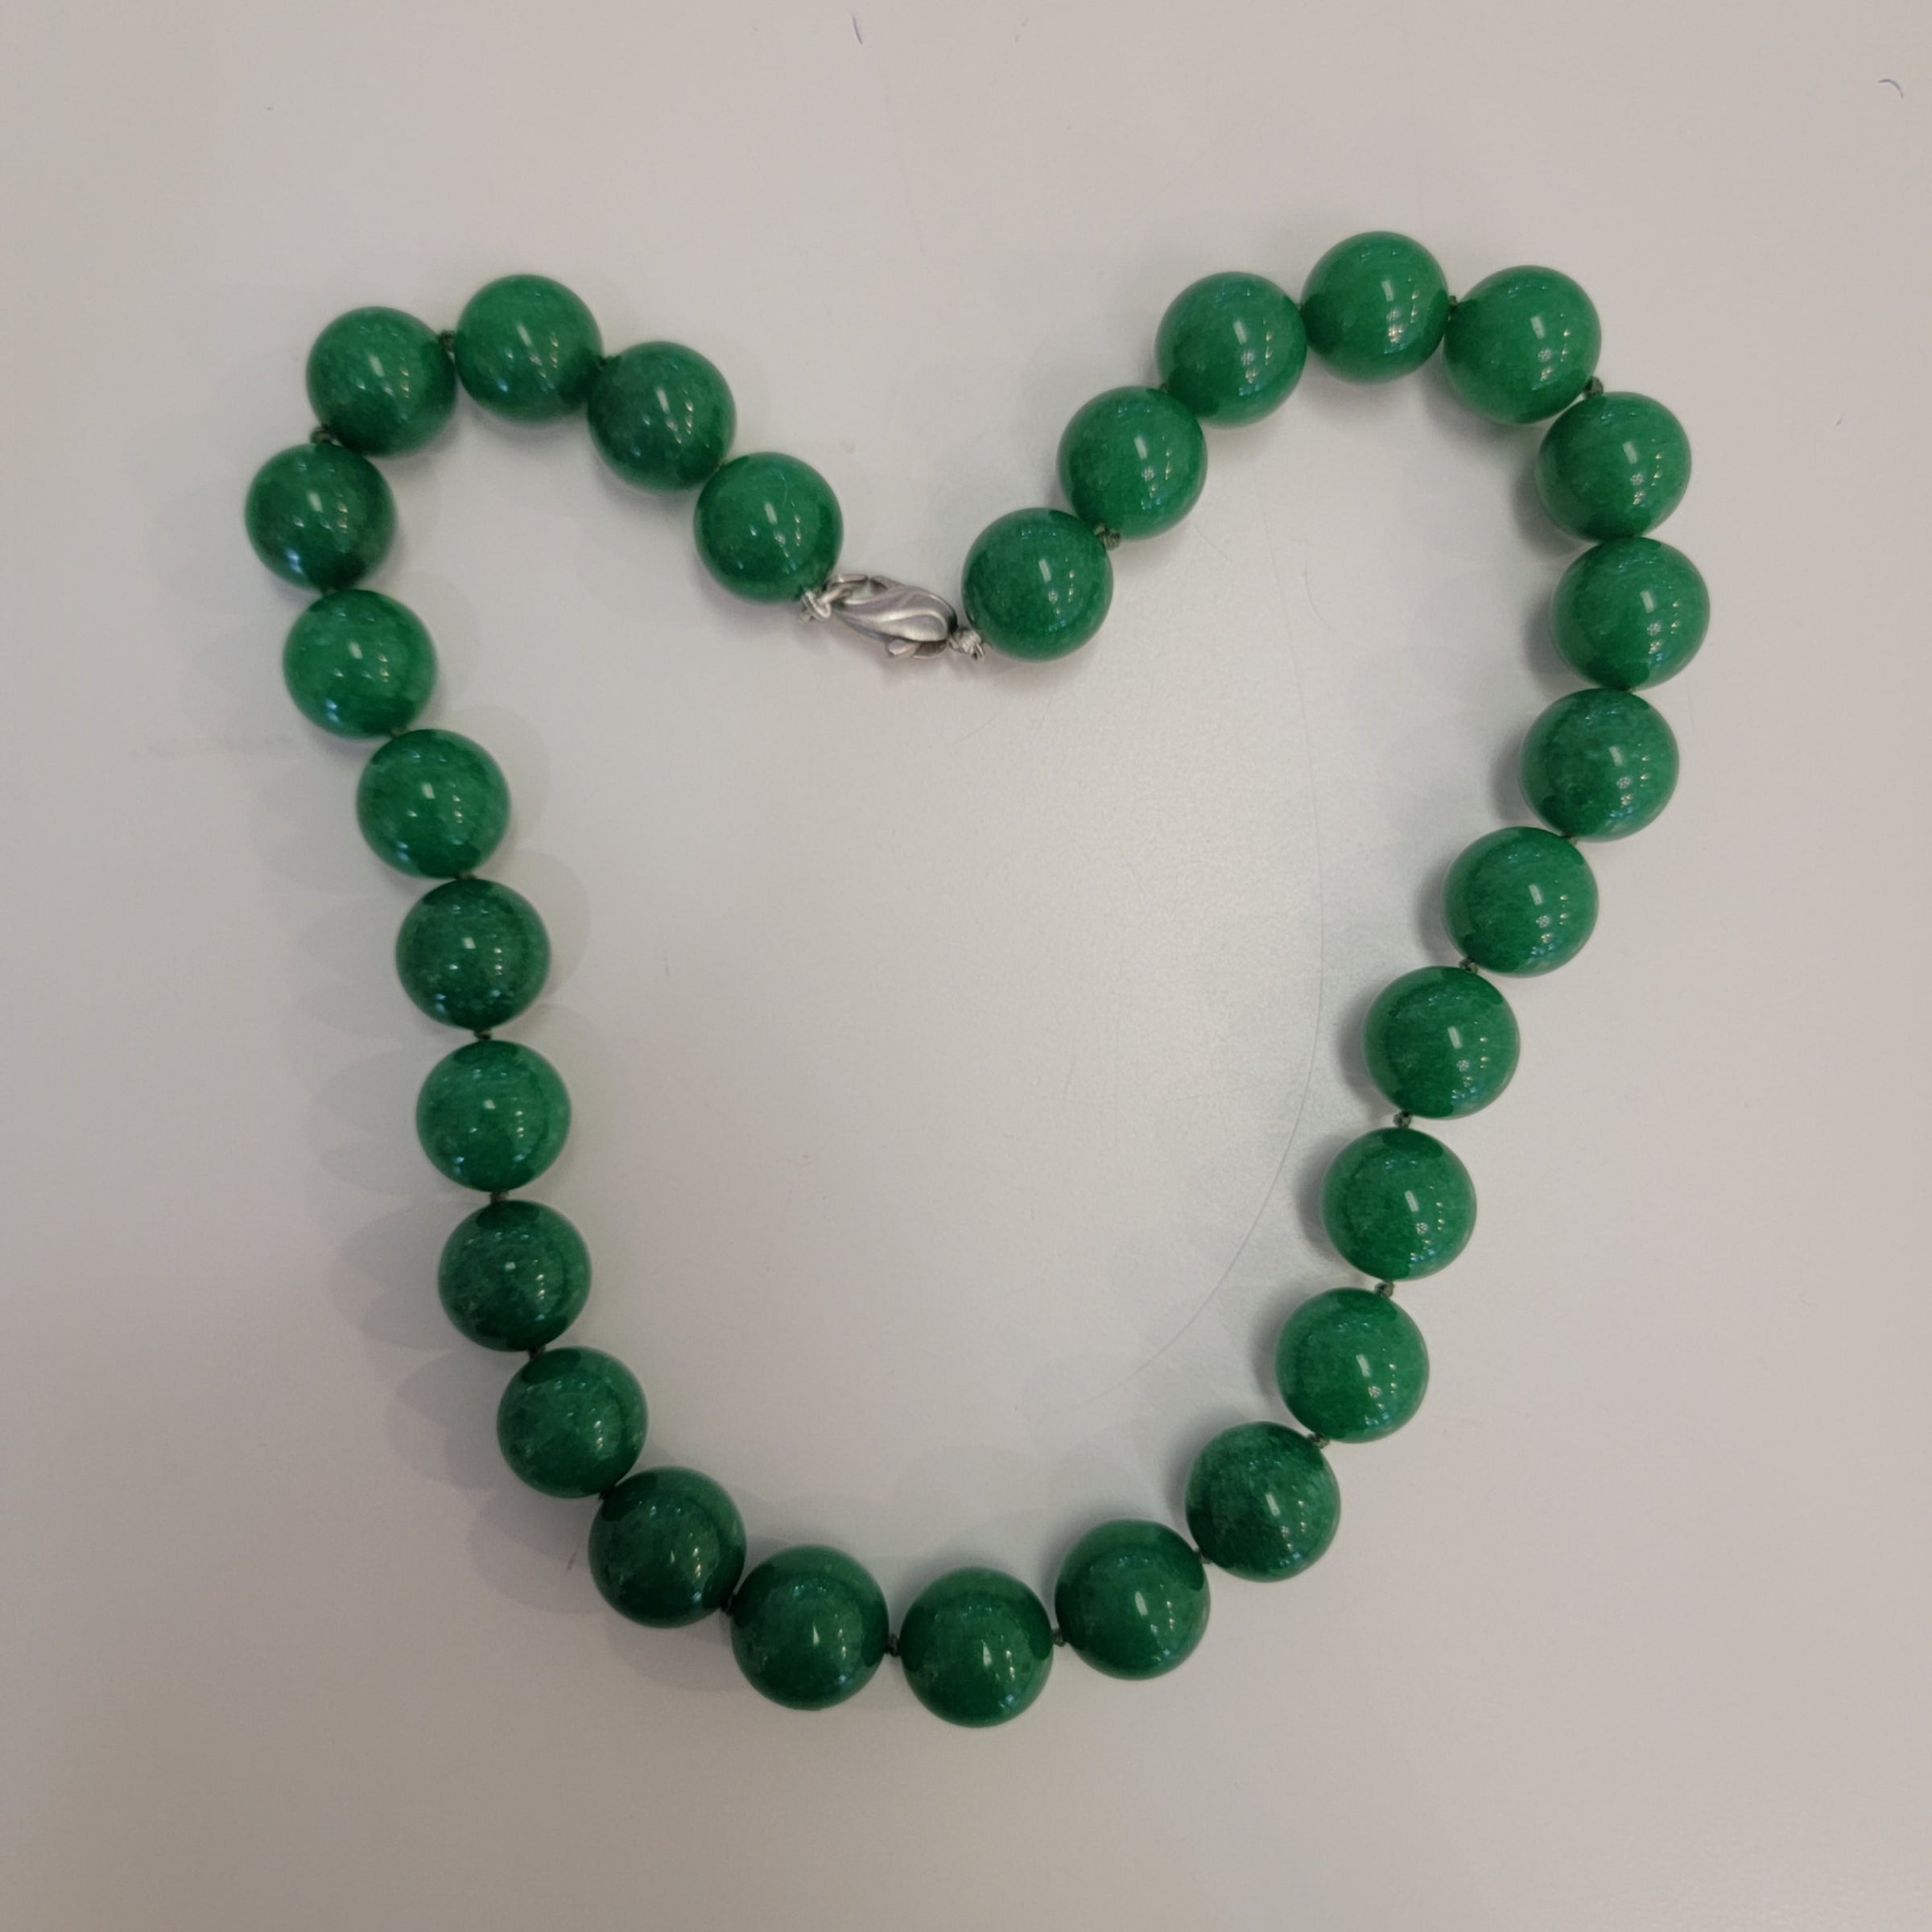 Jade, gold and Buddha neckace, hand-crafted in NYC by Gifted Unique